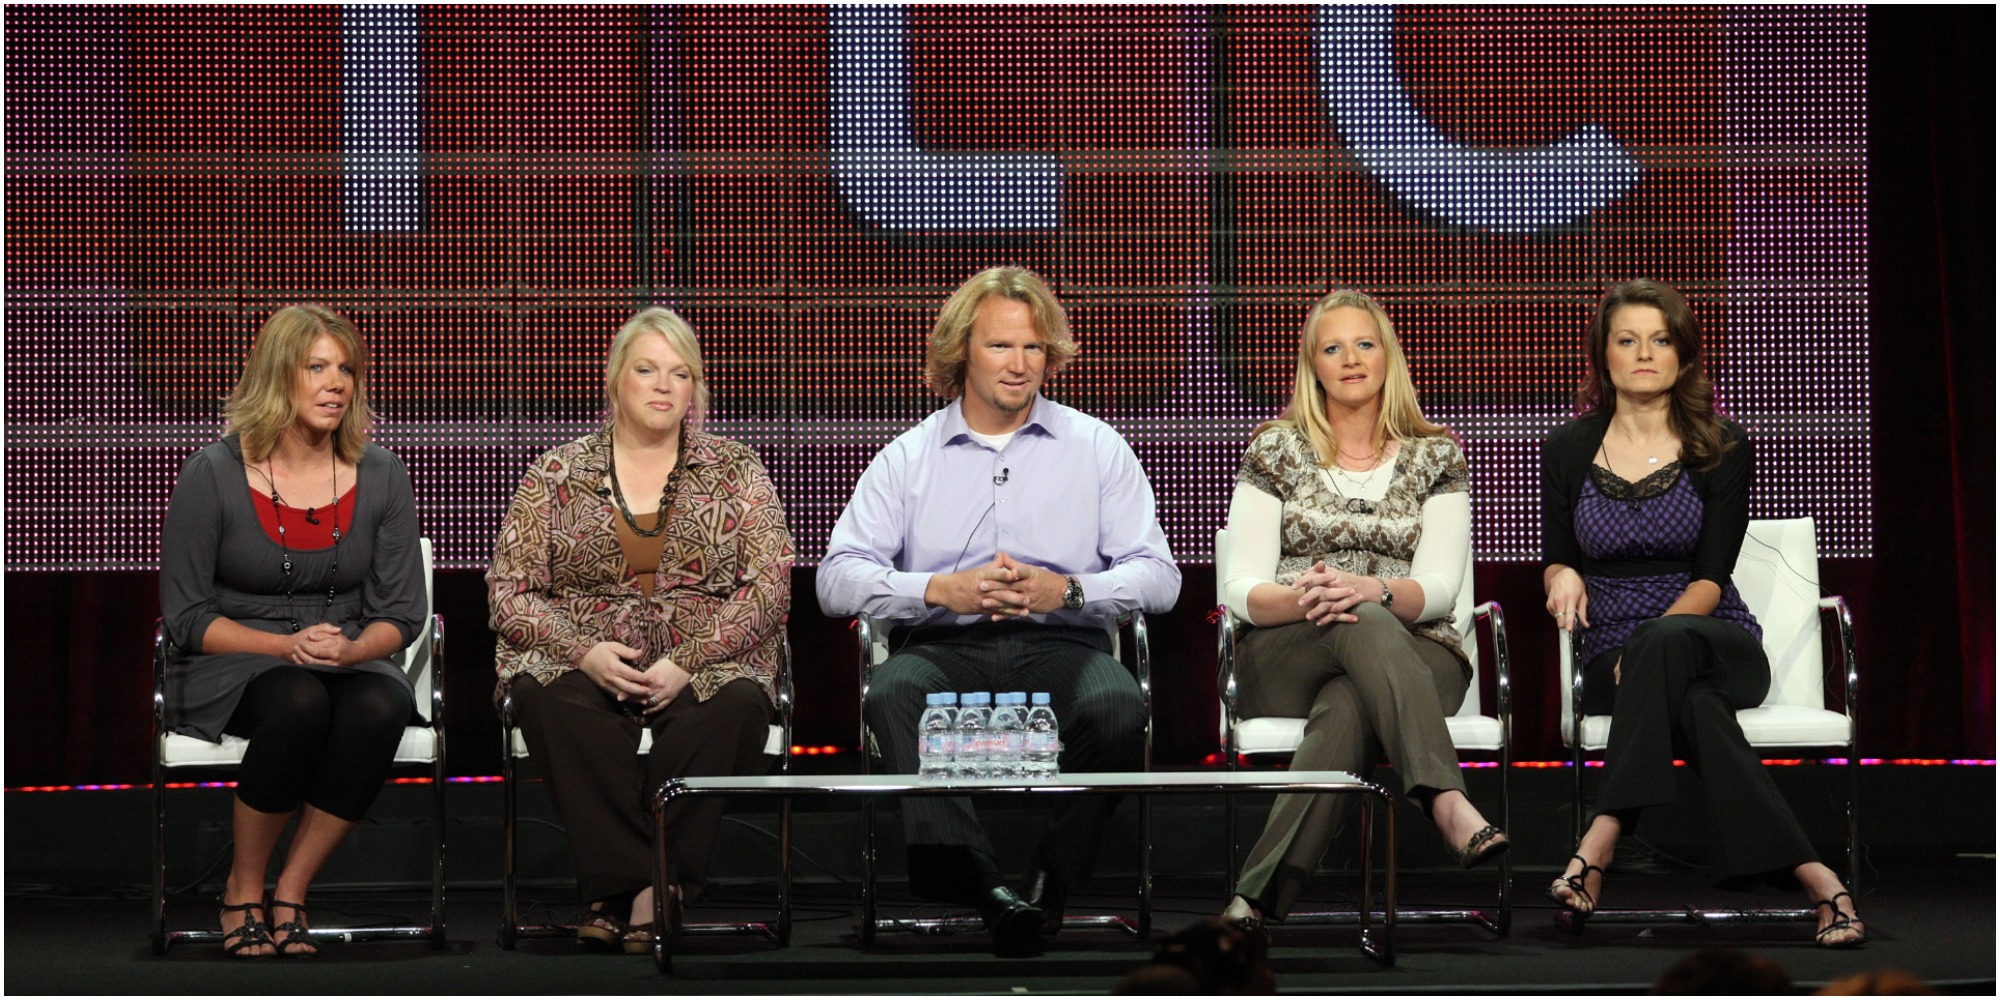 "Sister Wives" cast Meri, Janelle, Kody, Christine, and Robyn Brown during an interview.